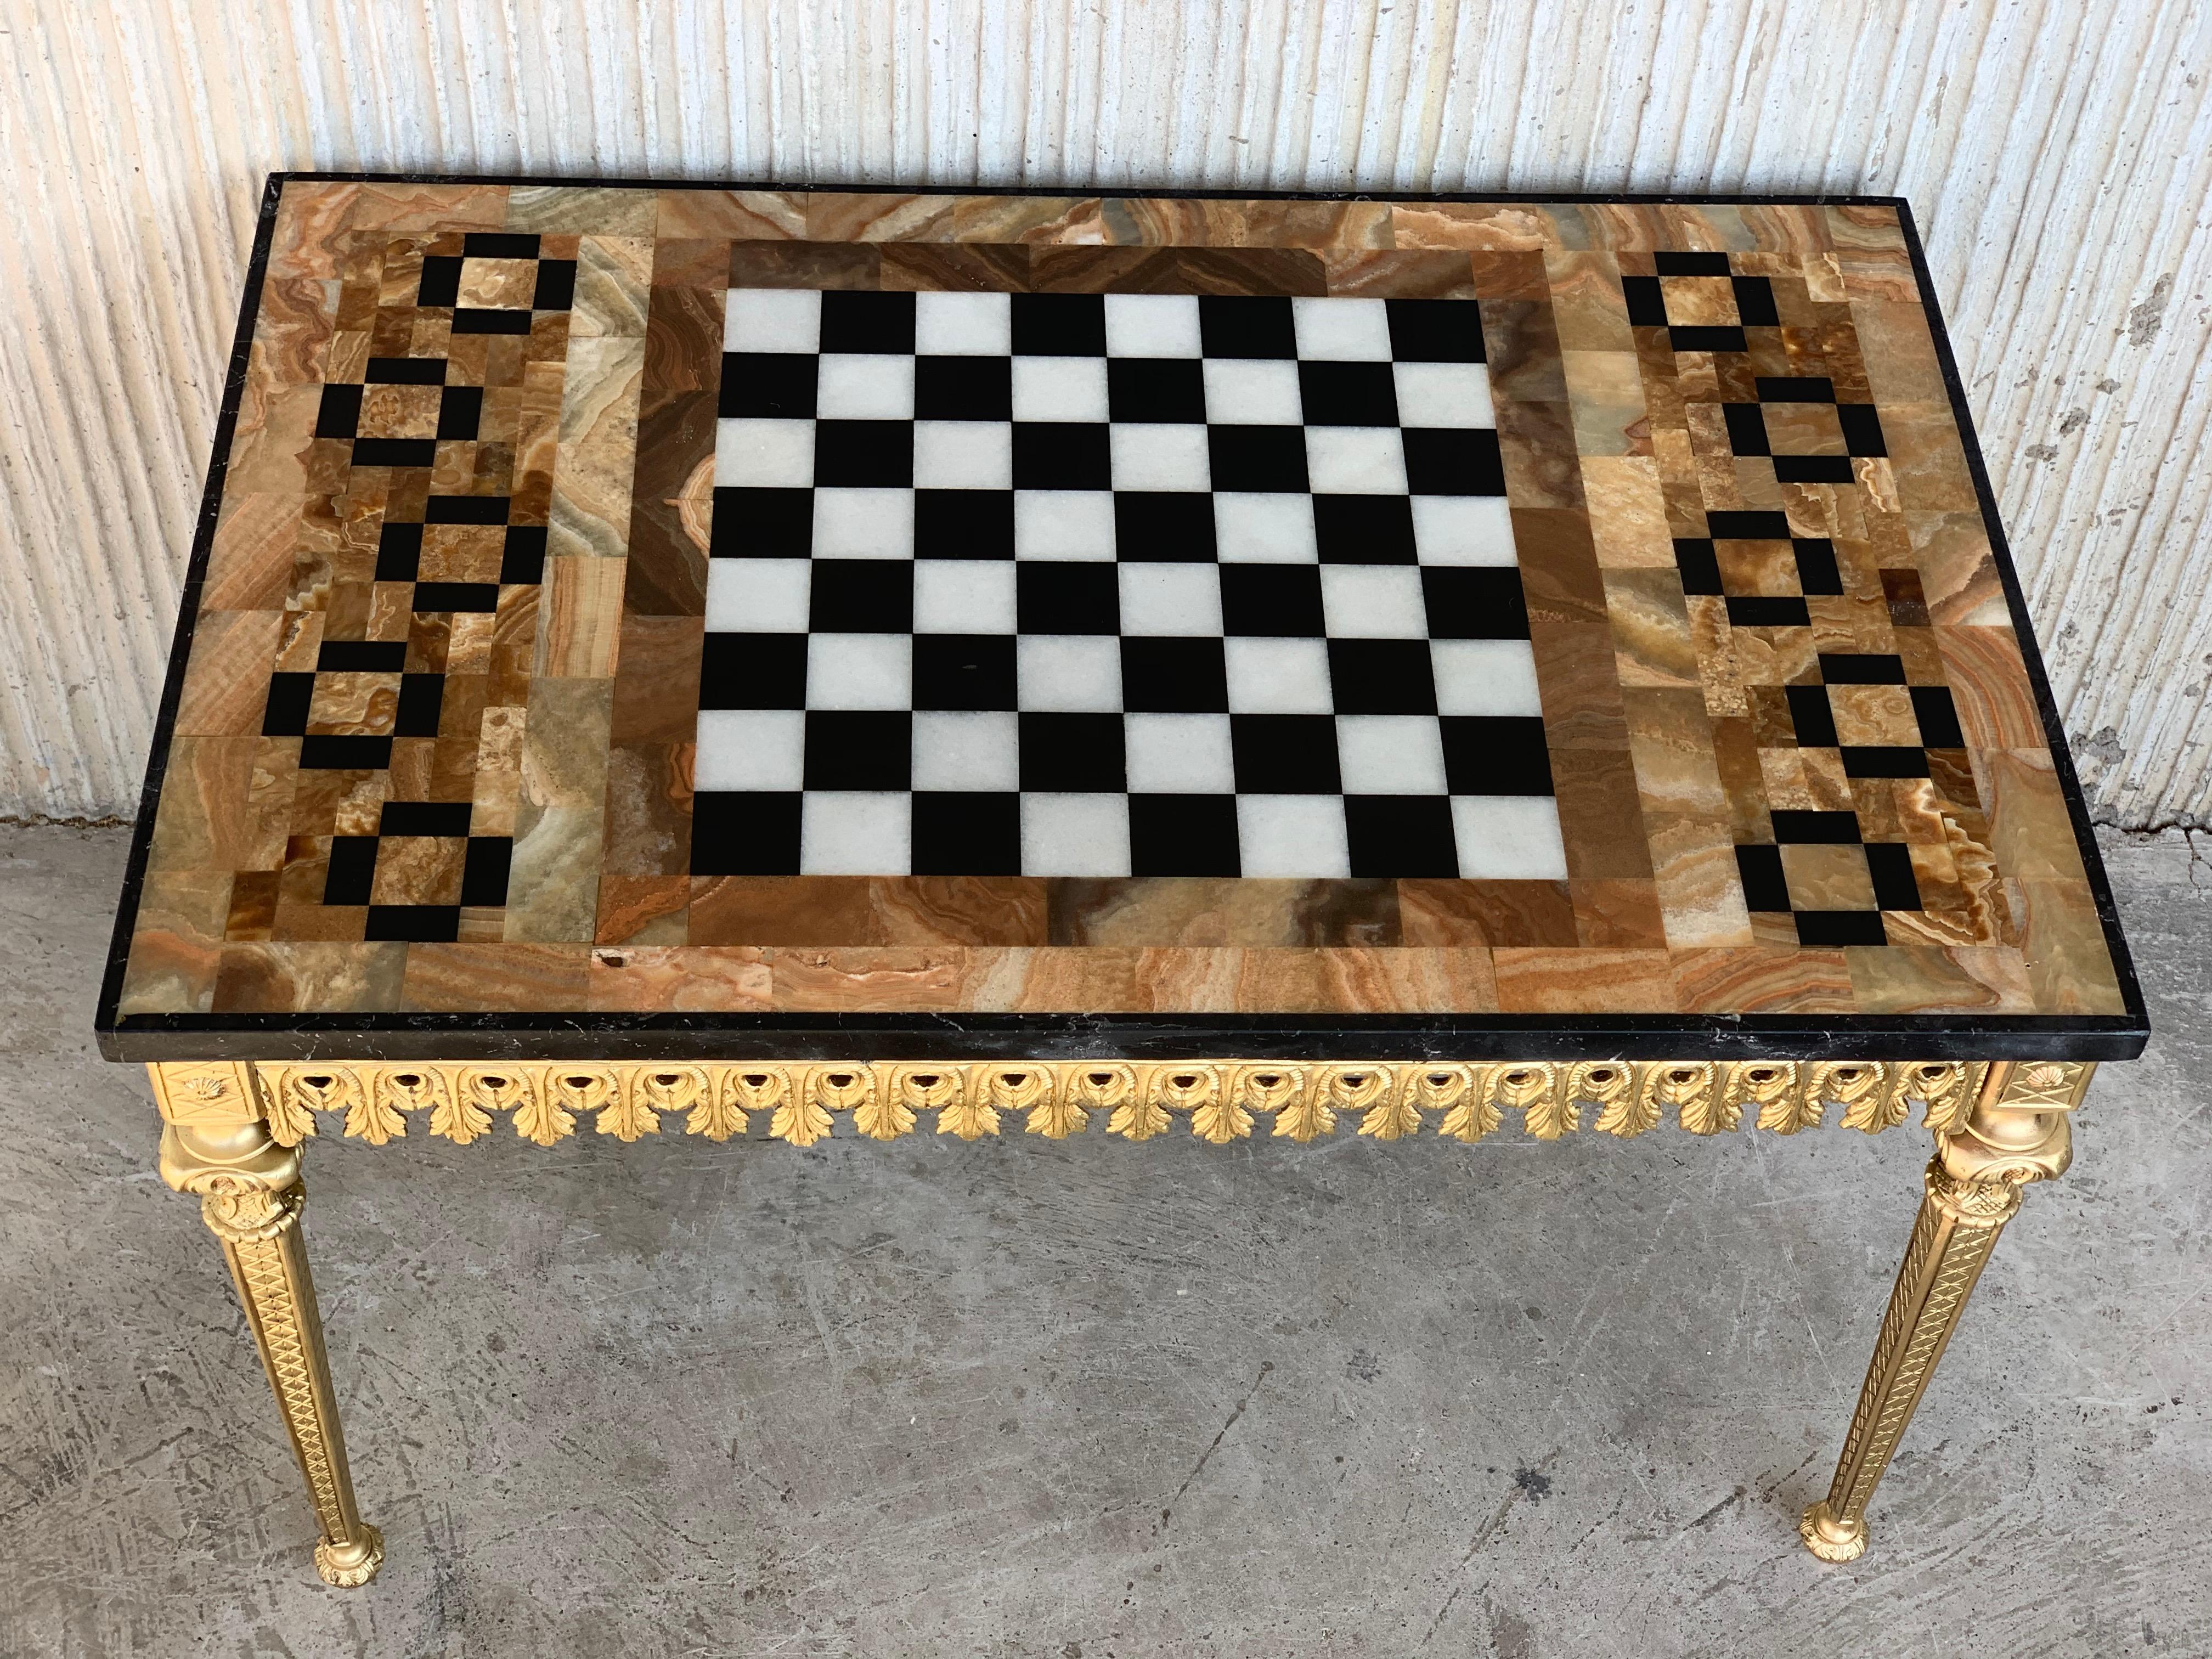 19th Century 20th Century Ormolu Mounted Bronze Game of Chess with Marble and Onix Top Table